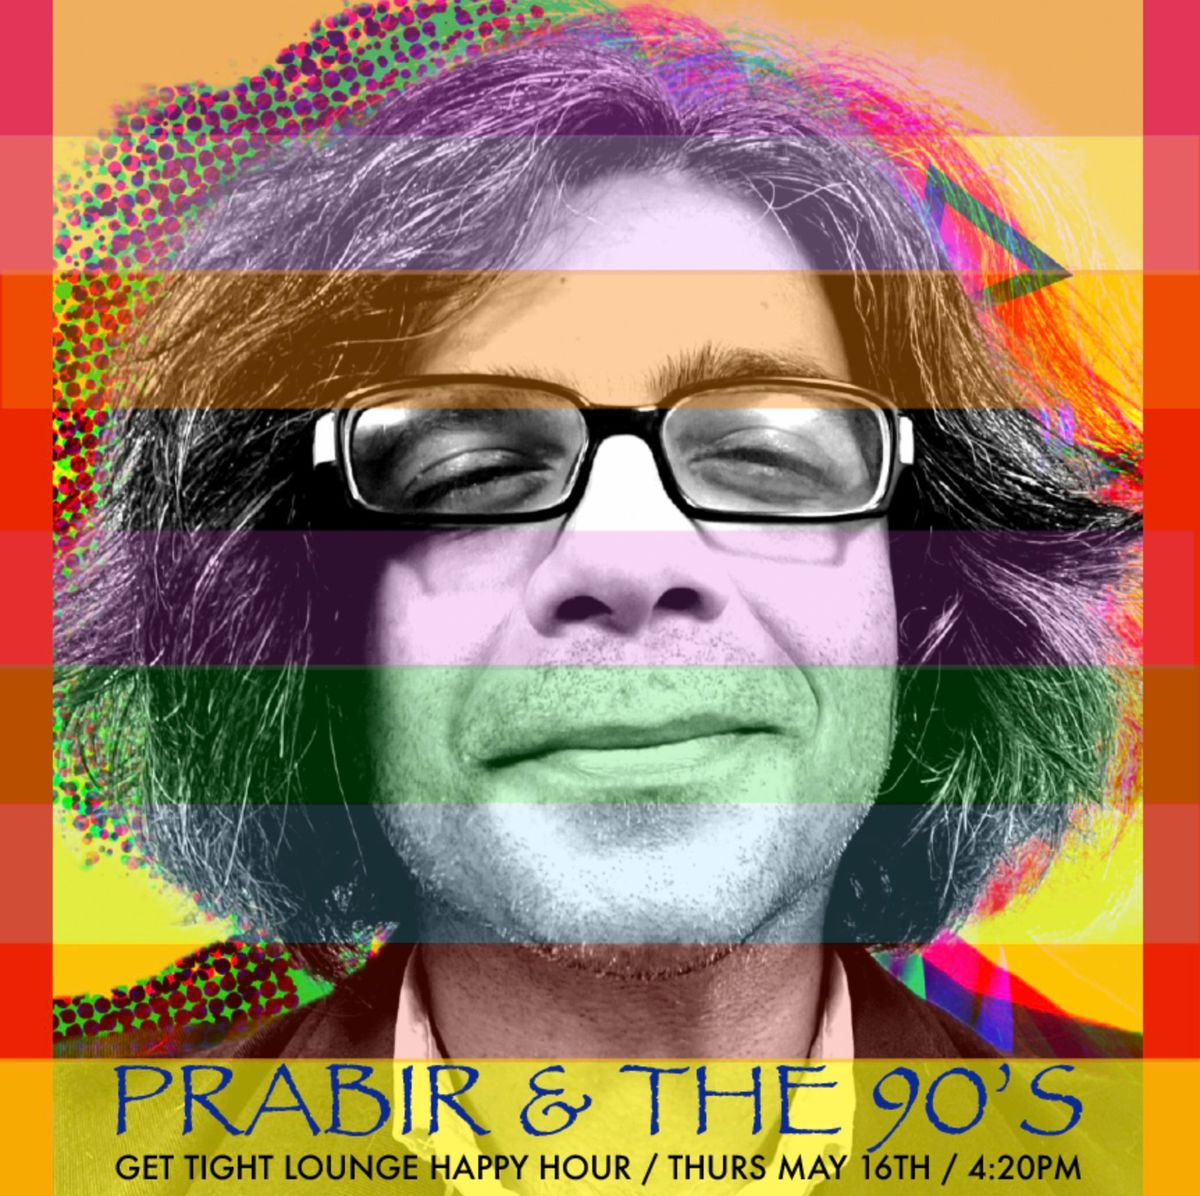 Prabir & The 90's Happy Hour at Get Tight Lounge Thurs May 16